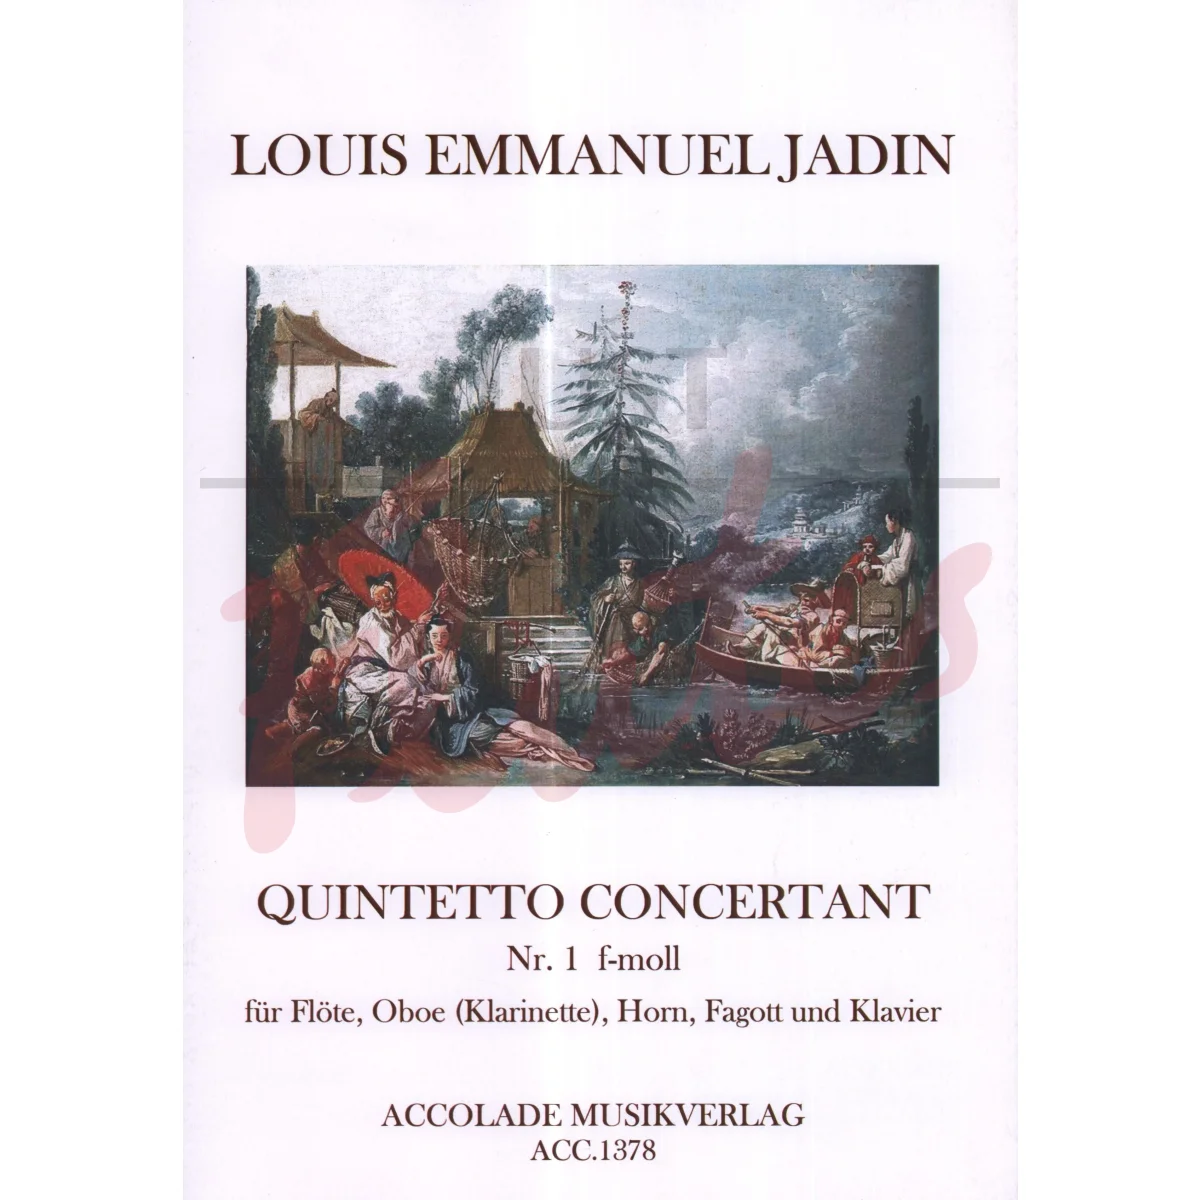 Quintetto Concertant No.1 in F minor for Flute, Oboe/Clarinet, Horn, Bassoon and Piano